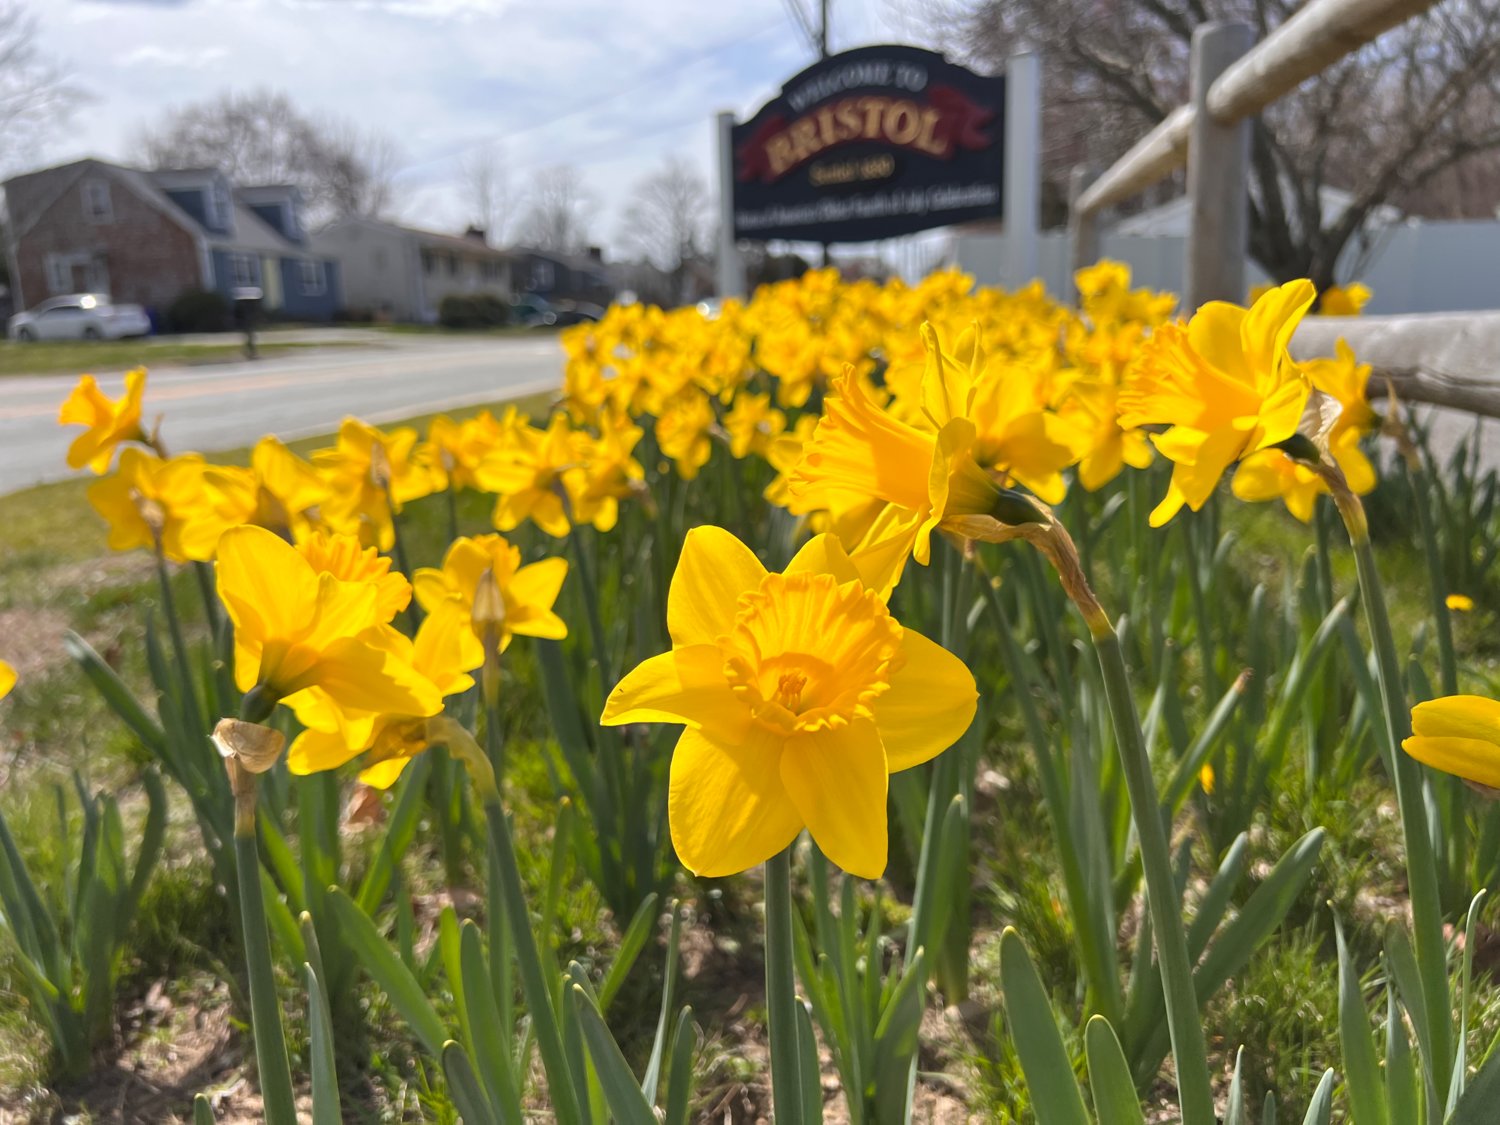 Last October, volunteers from North Farm and the Audubon Society planted 4,000 daffodil bulbs, donated by the Bristol Garden Club, from the “Welcome to Bristol” sign on Hope Street all the way to South Lane. Here they are bloomed along Hope Street in April.